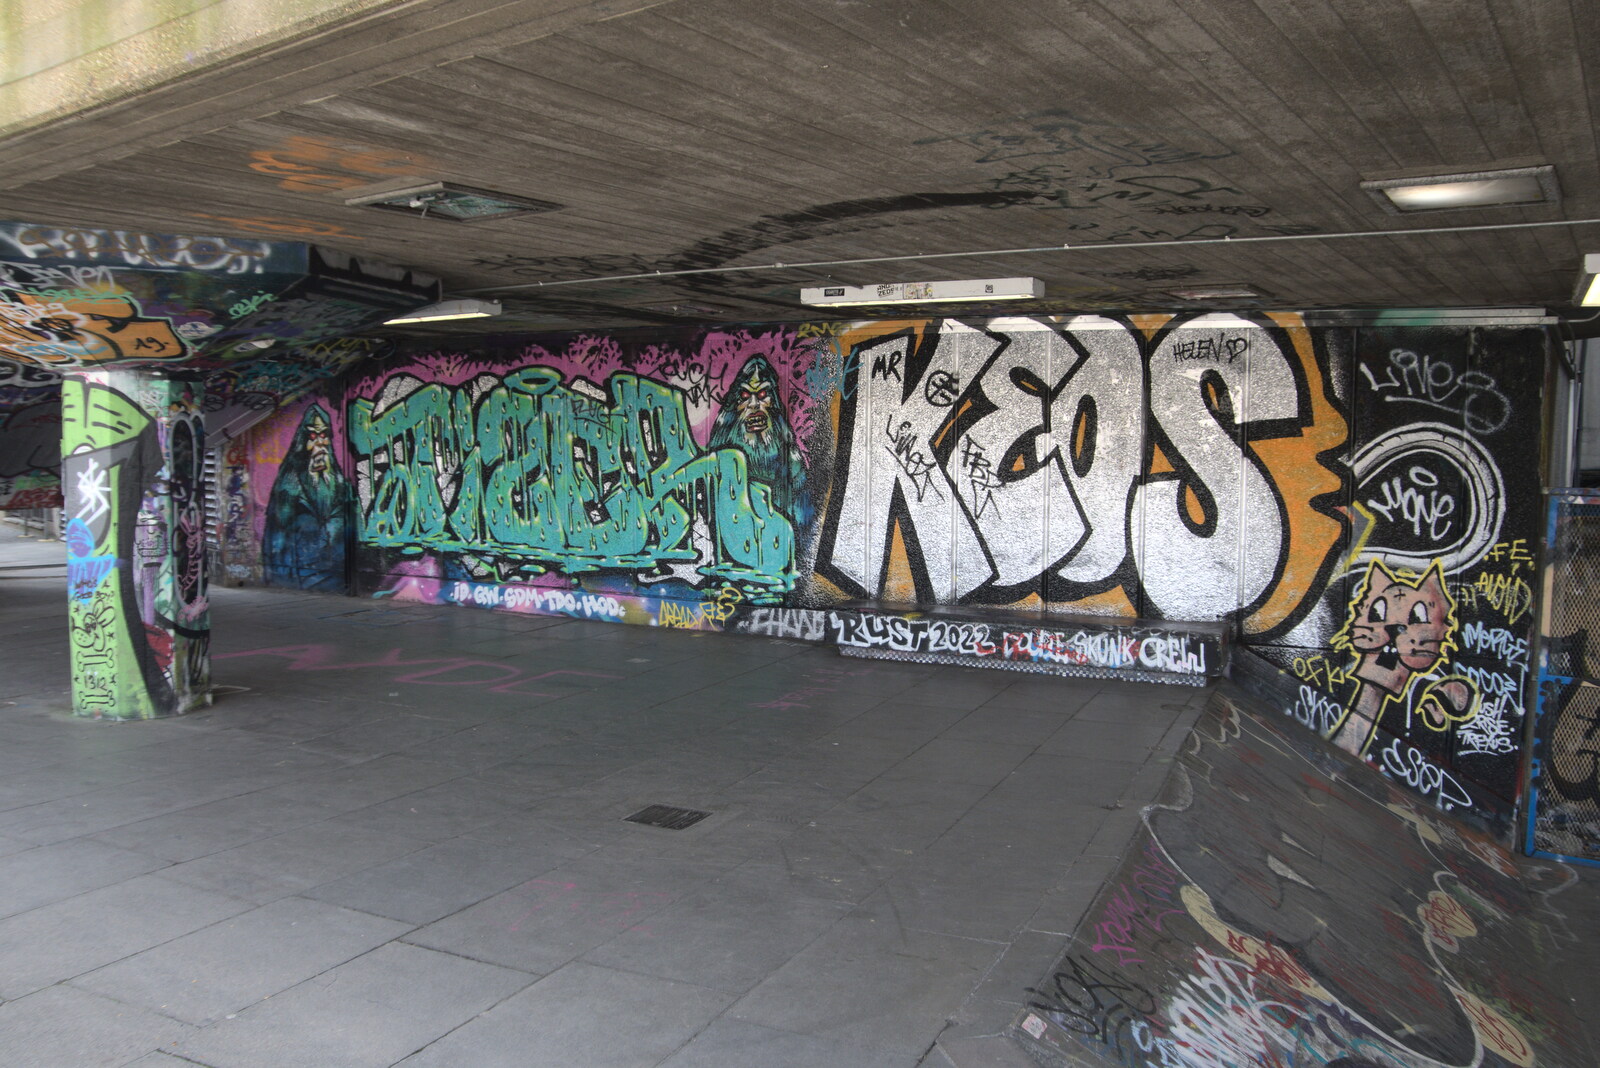 A Walk Around the South Bank, London - 25th March 2022: Lots of graffiti under the Festival Hall